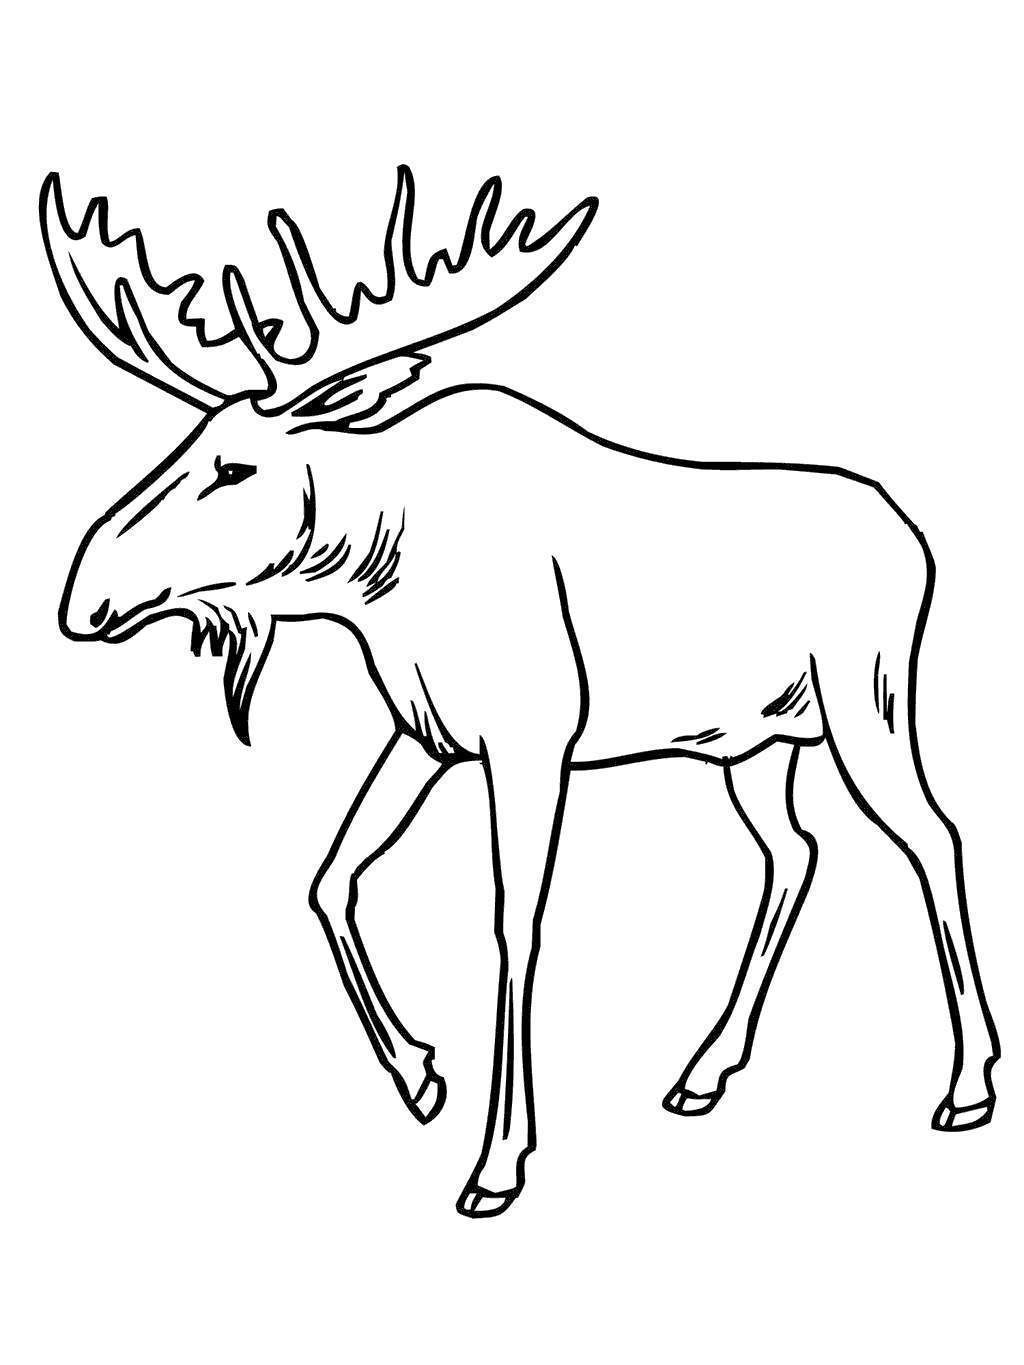 Moose Coloring Pages Coloring Sheets Free Printable Coloring Pages